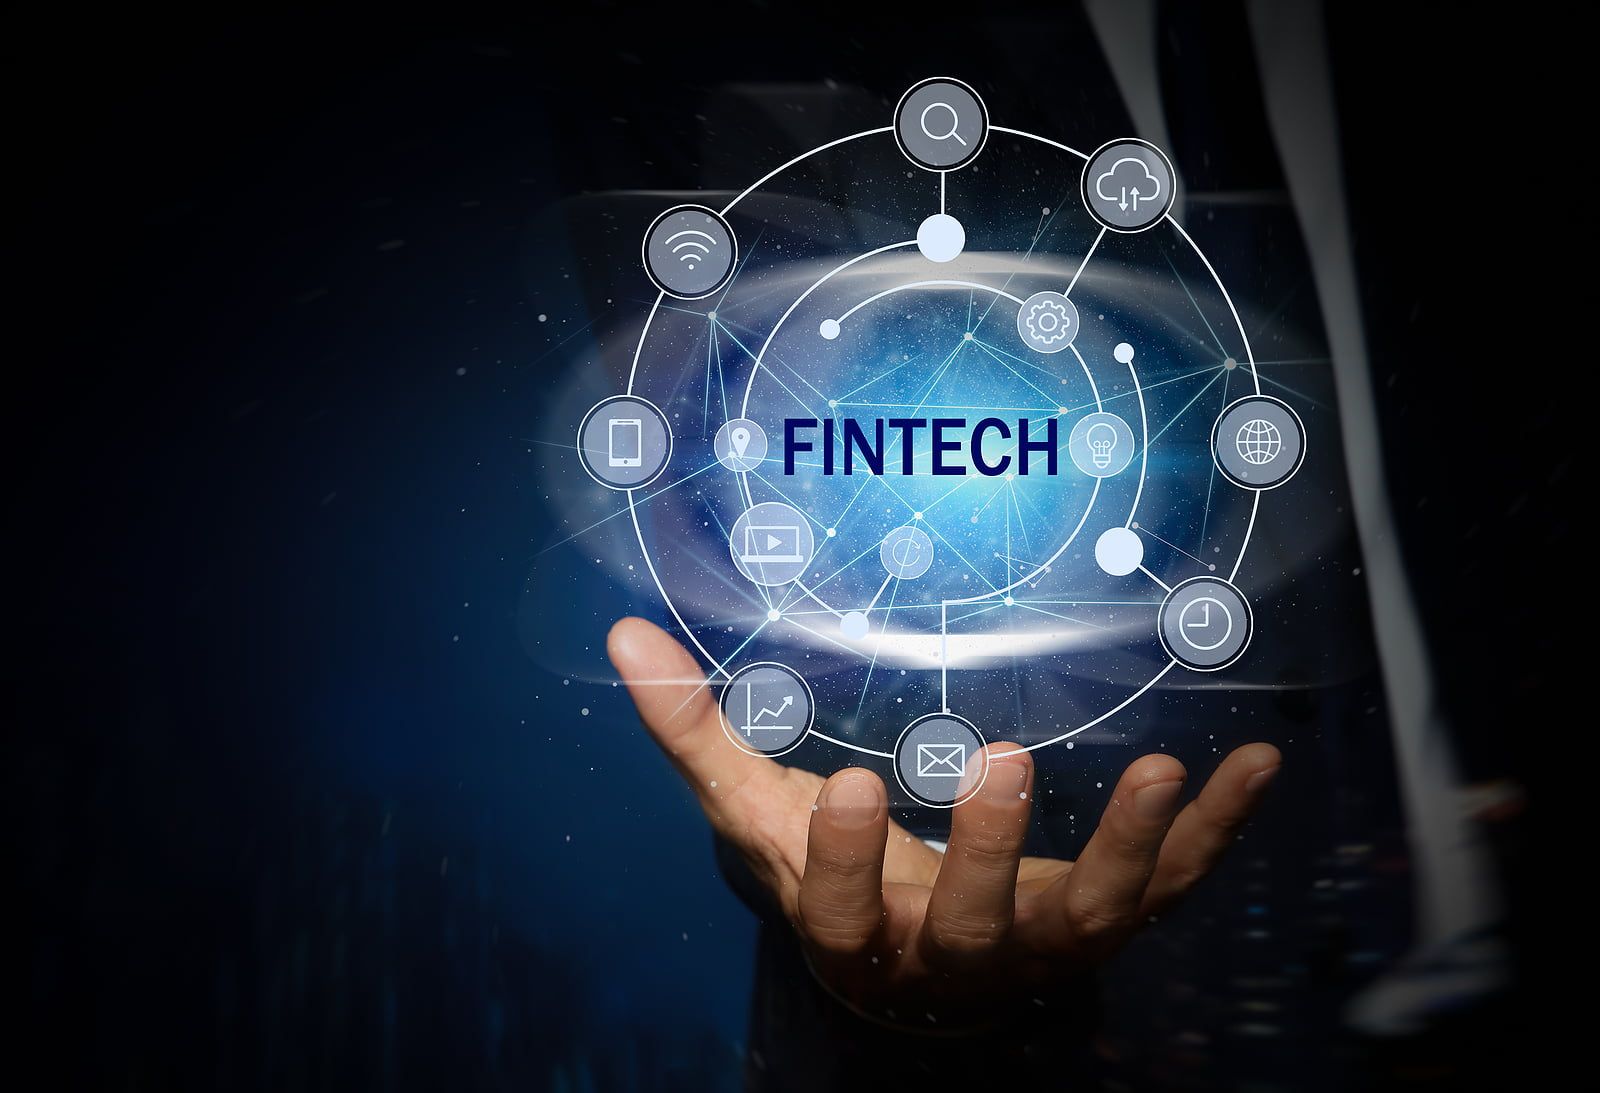 Africa’s Disrupt Story: The Case of Fintech Startups in Nigeria